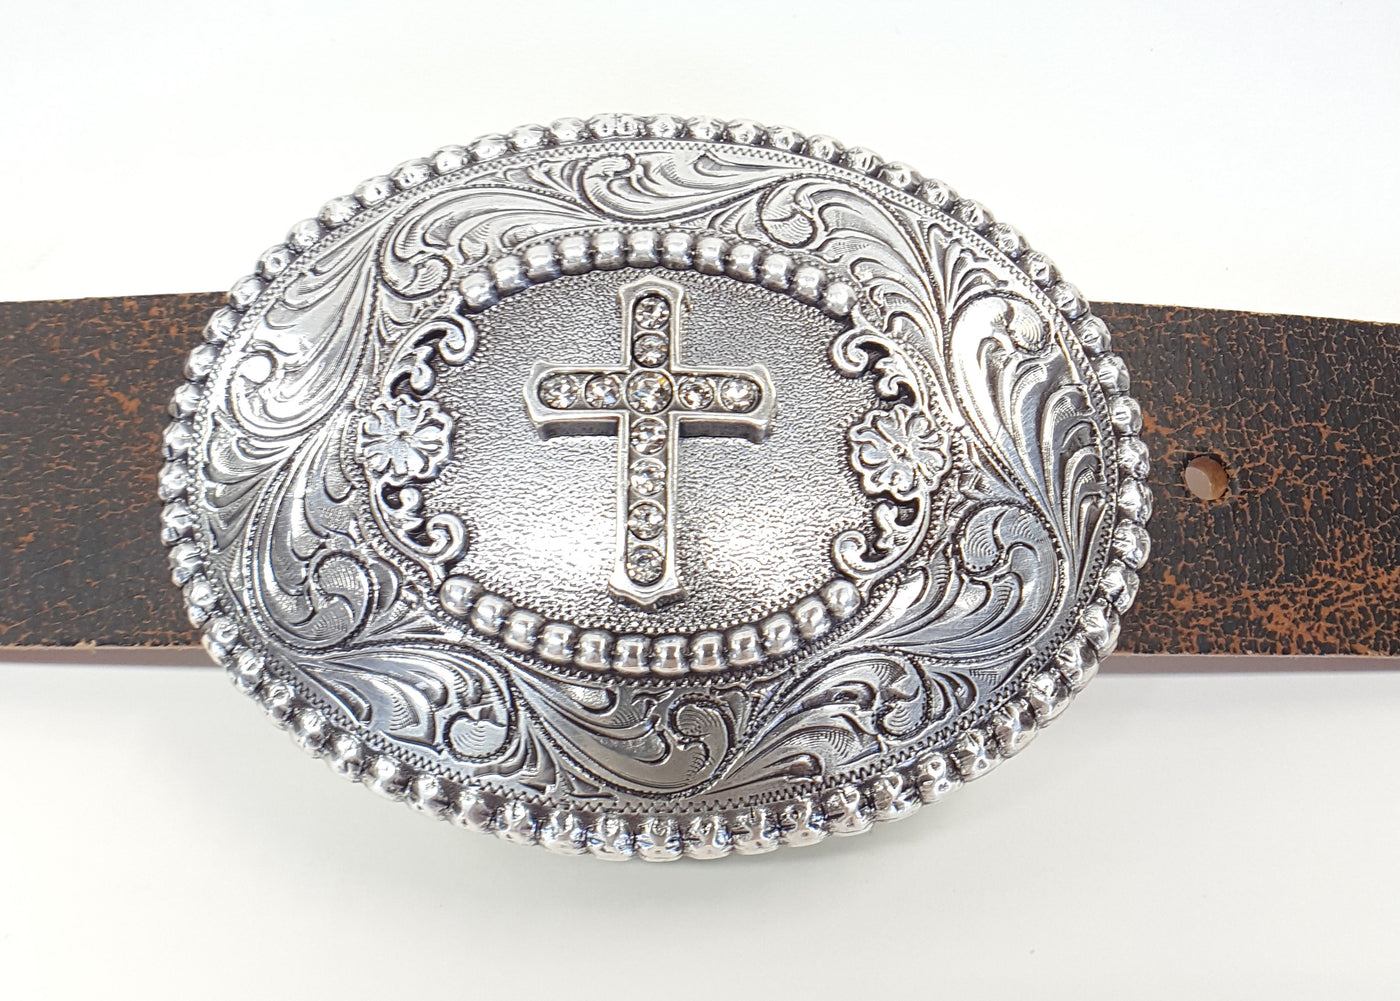 Antiqued finish with intricately detailed scroll background Center cross is accented with rhinestones A perfect way to dress up your wardrobe Dimensions: 3" tall by 3 3/4" wide Available online and in our shop just outside Nashville in Smyrna, TN.